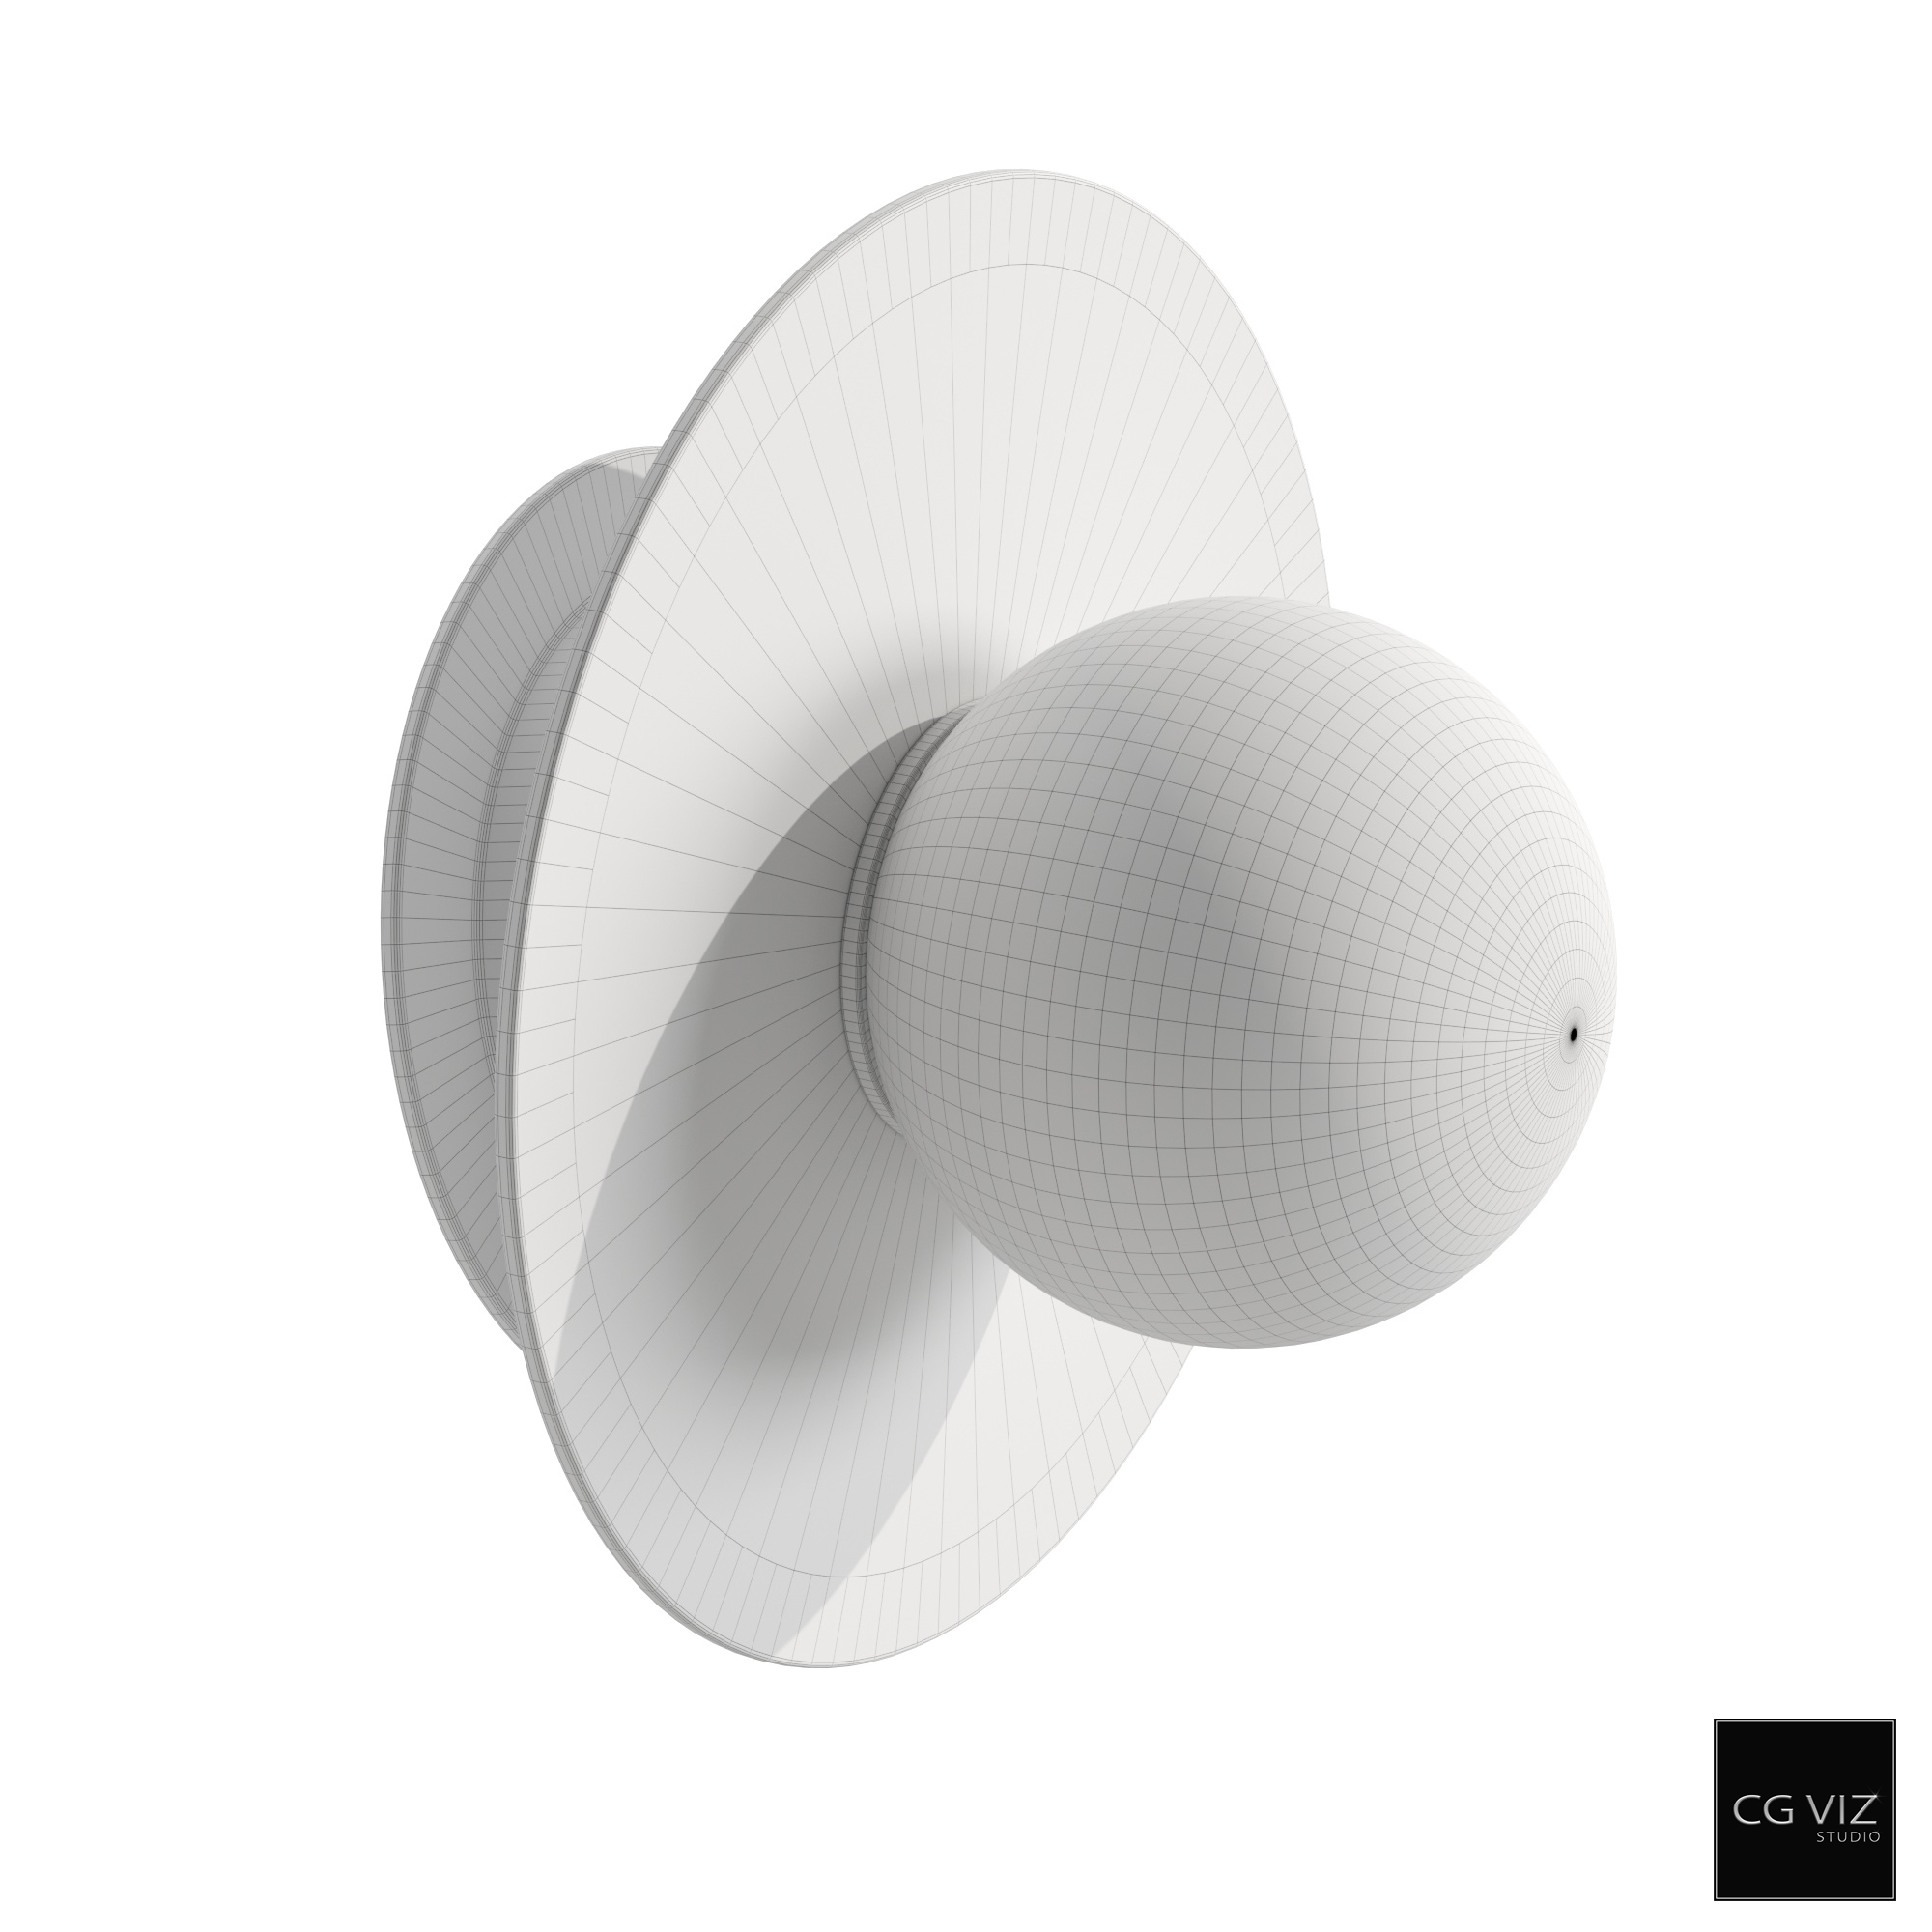 Wireframe View of Circa Nodes Large Angled Sconce 3D Model